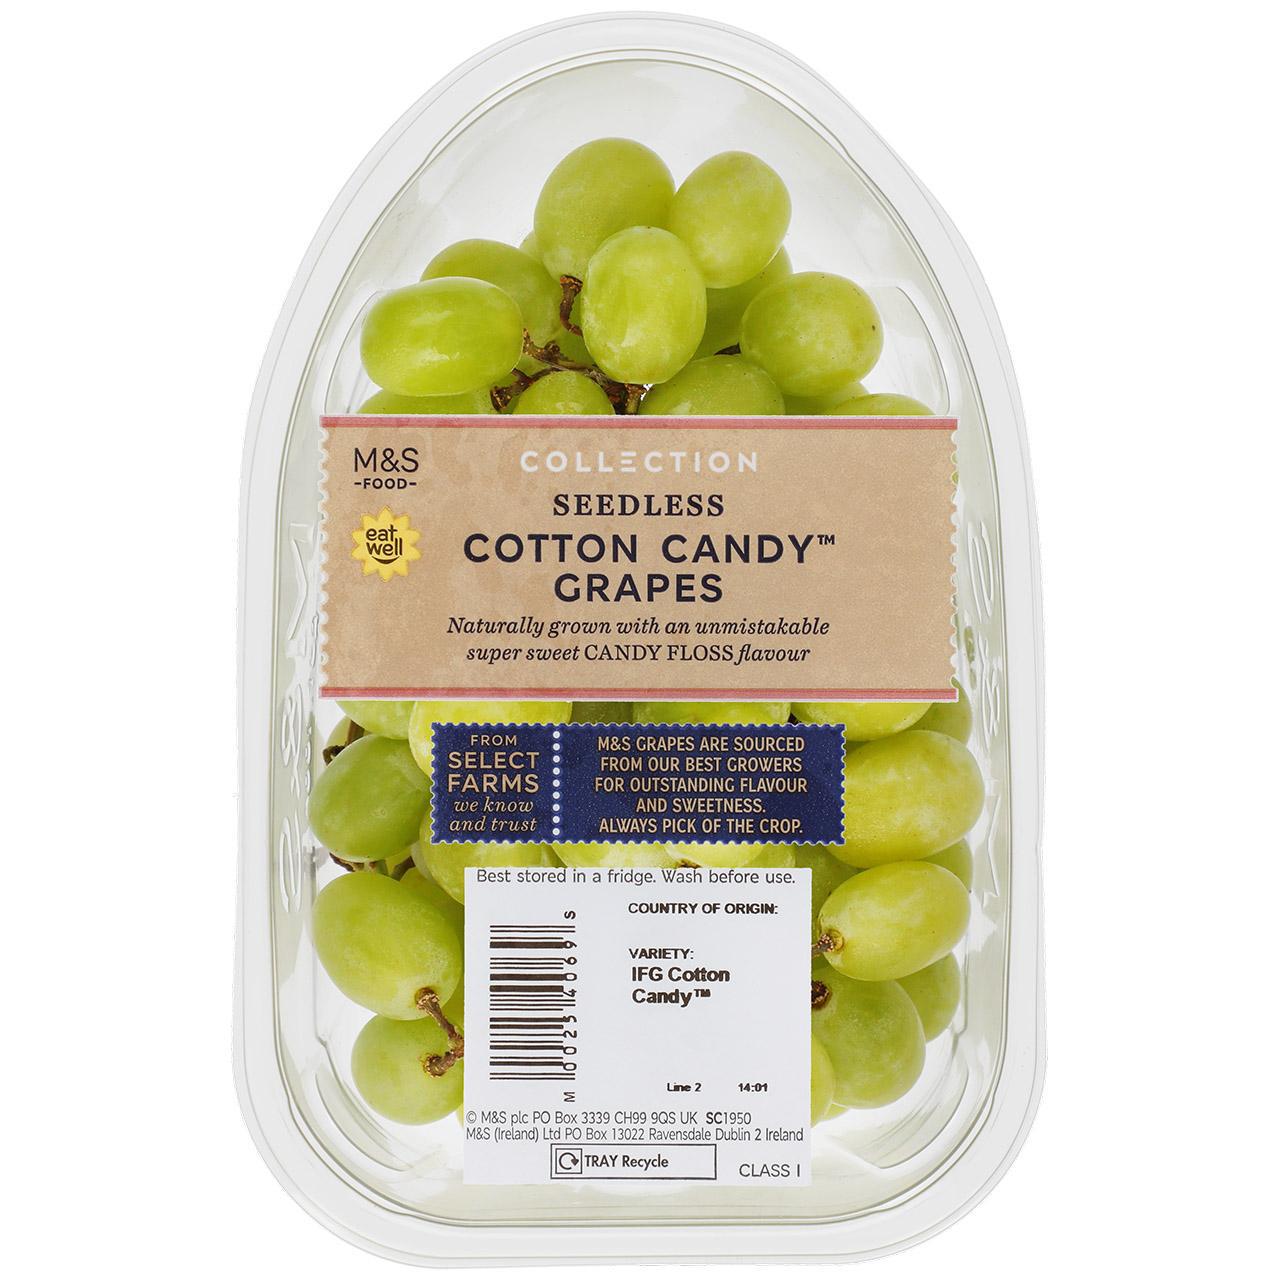 M&S Collection Cotton Candy Seedless Grapes 400g